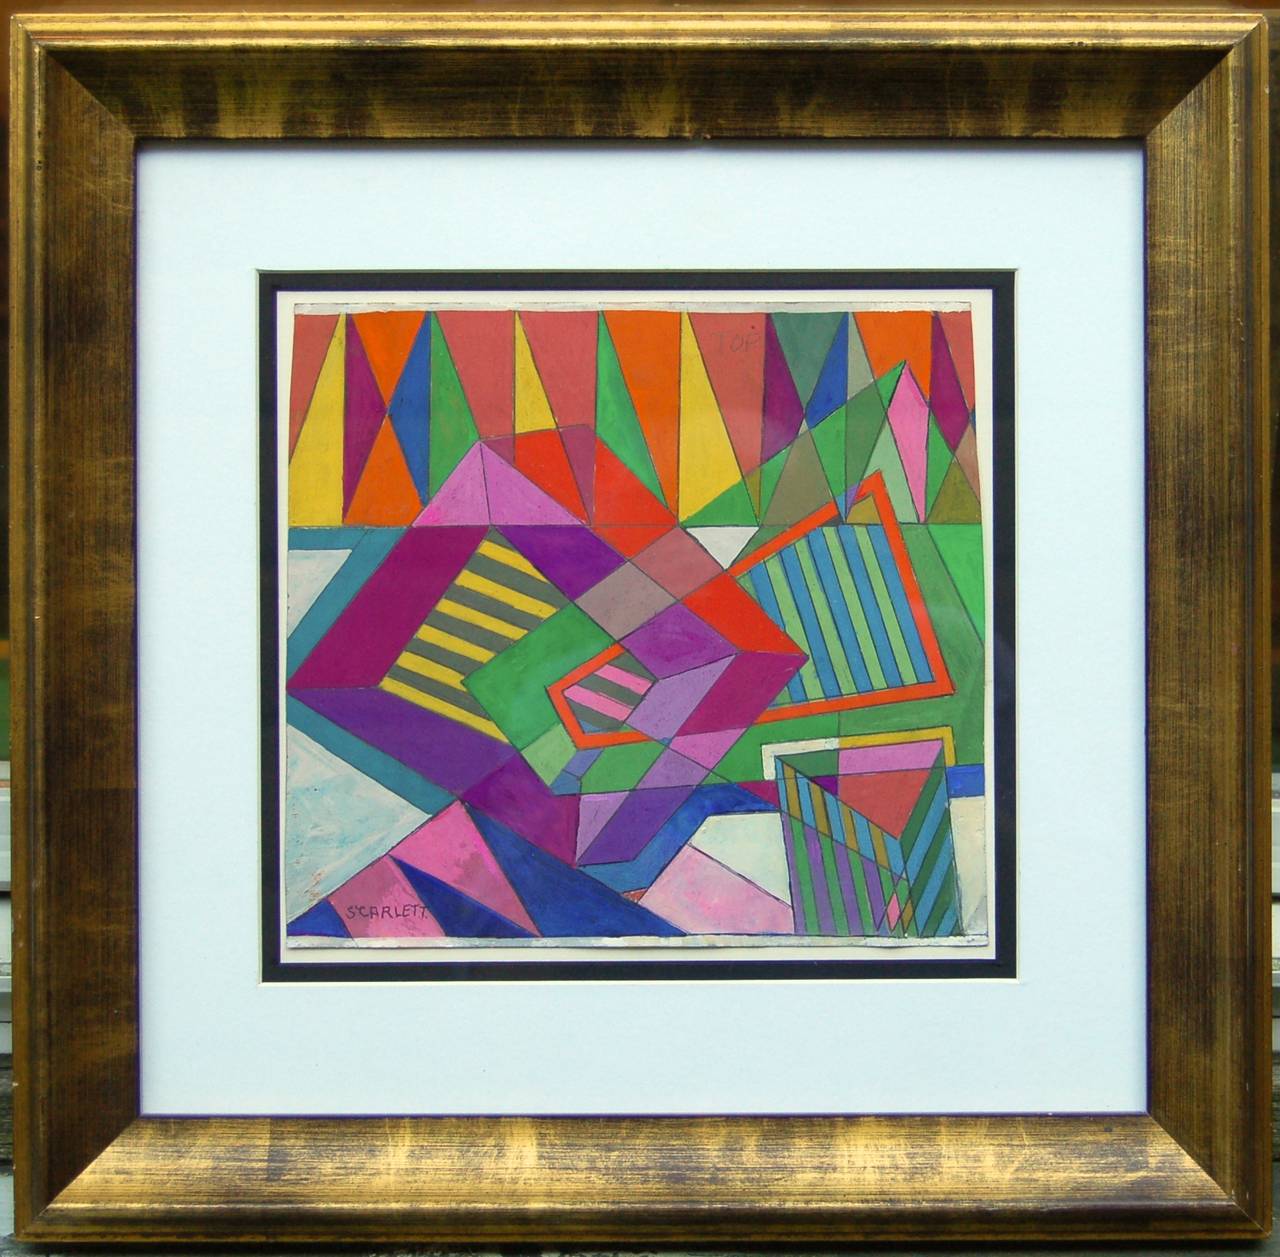 Geometric Abstract - Mixed Media Art by Rolph Scarlett